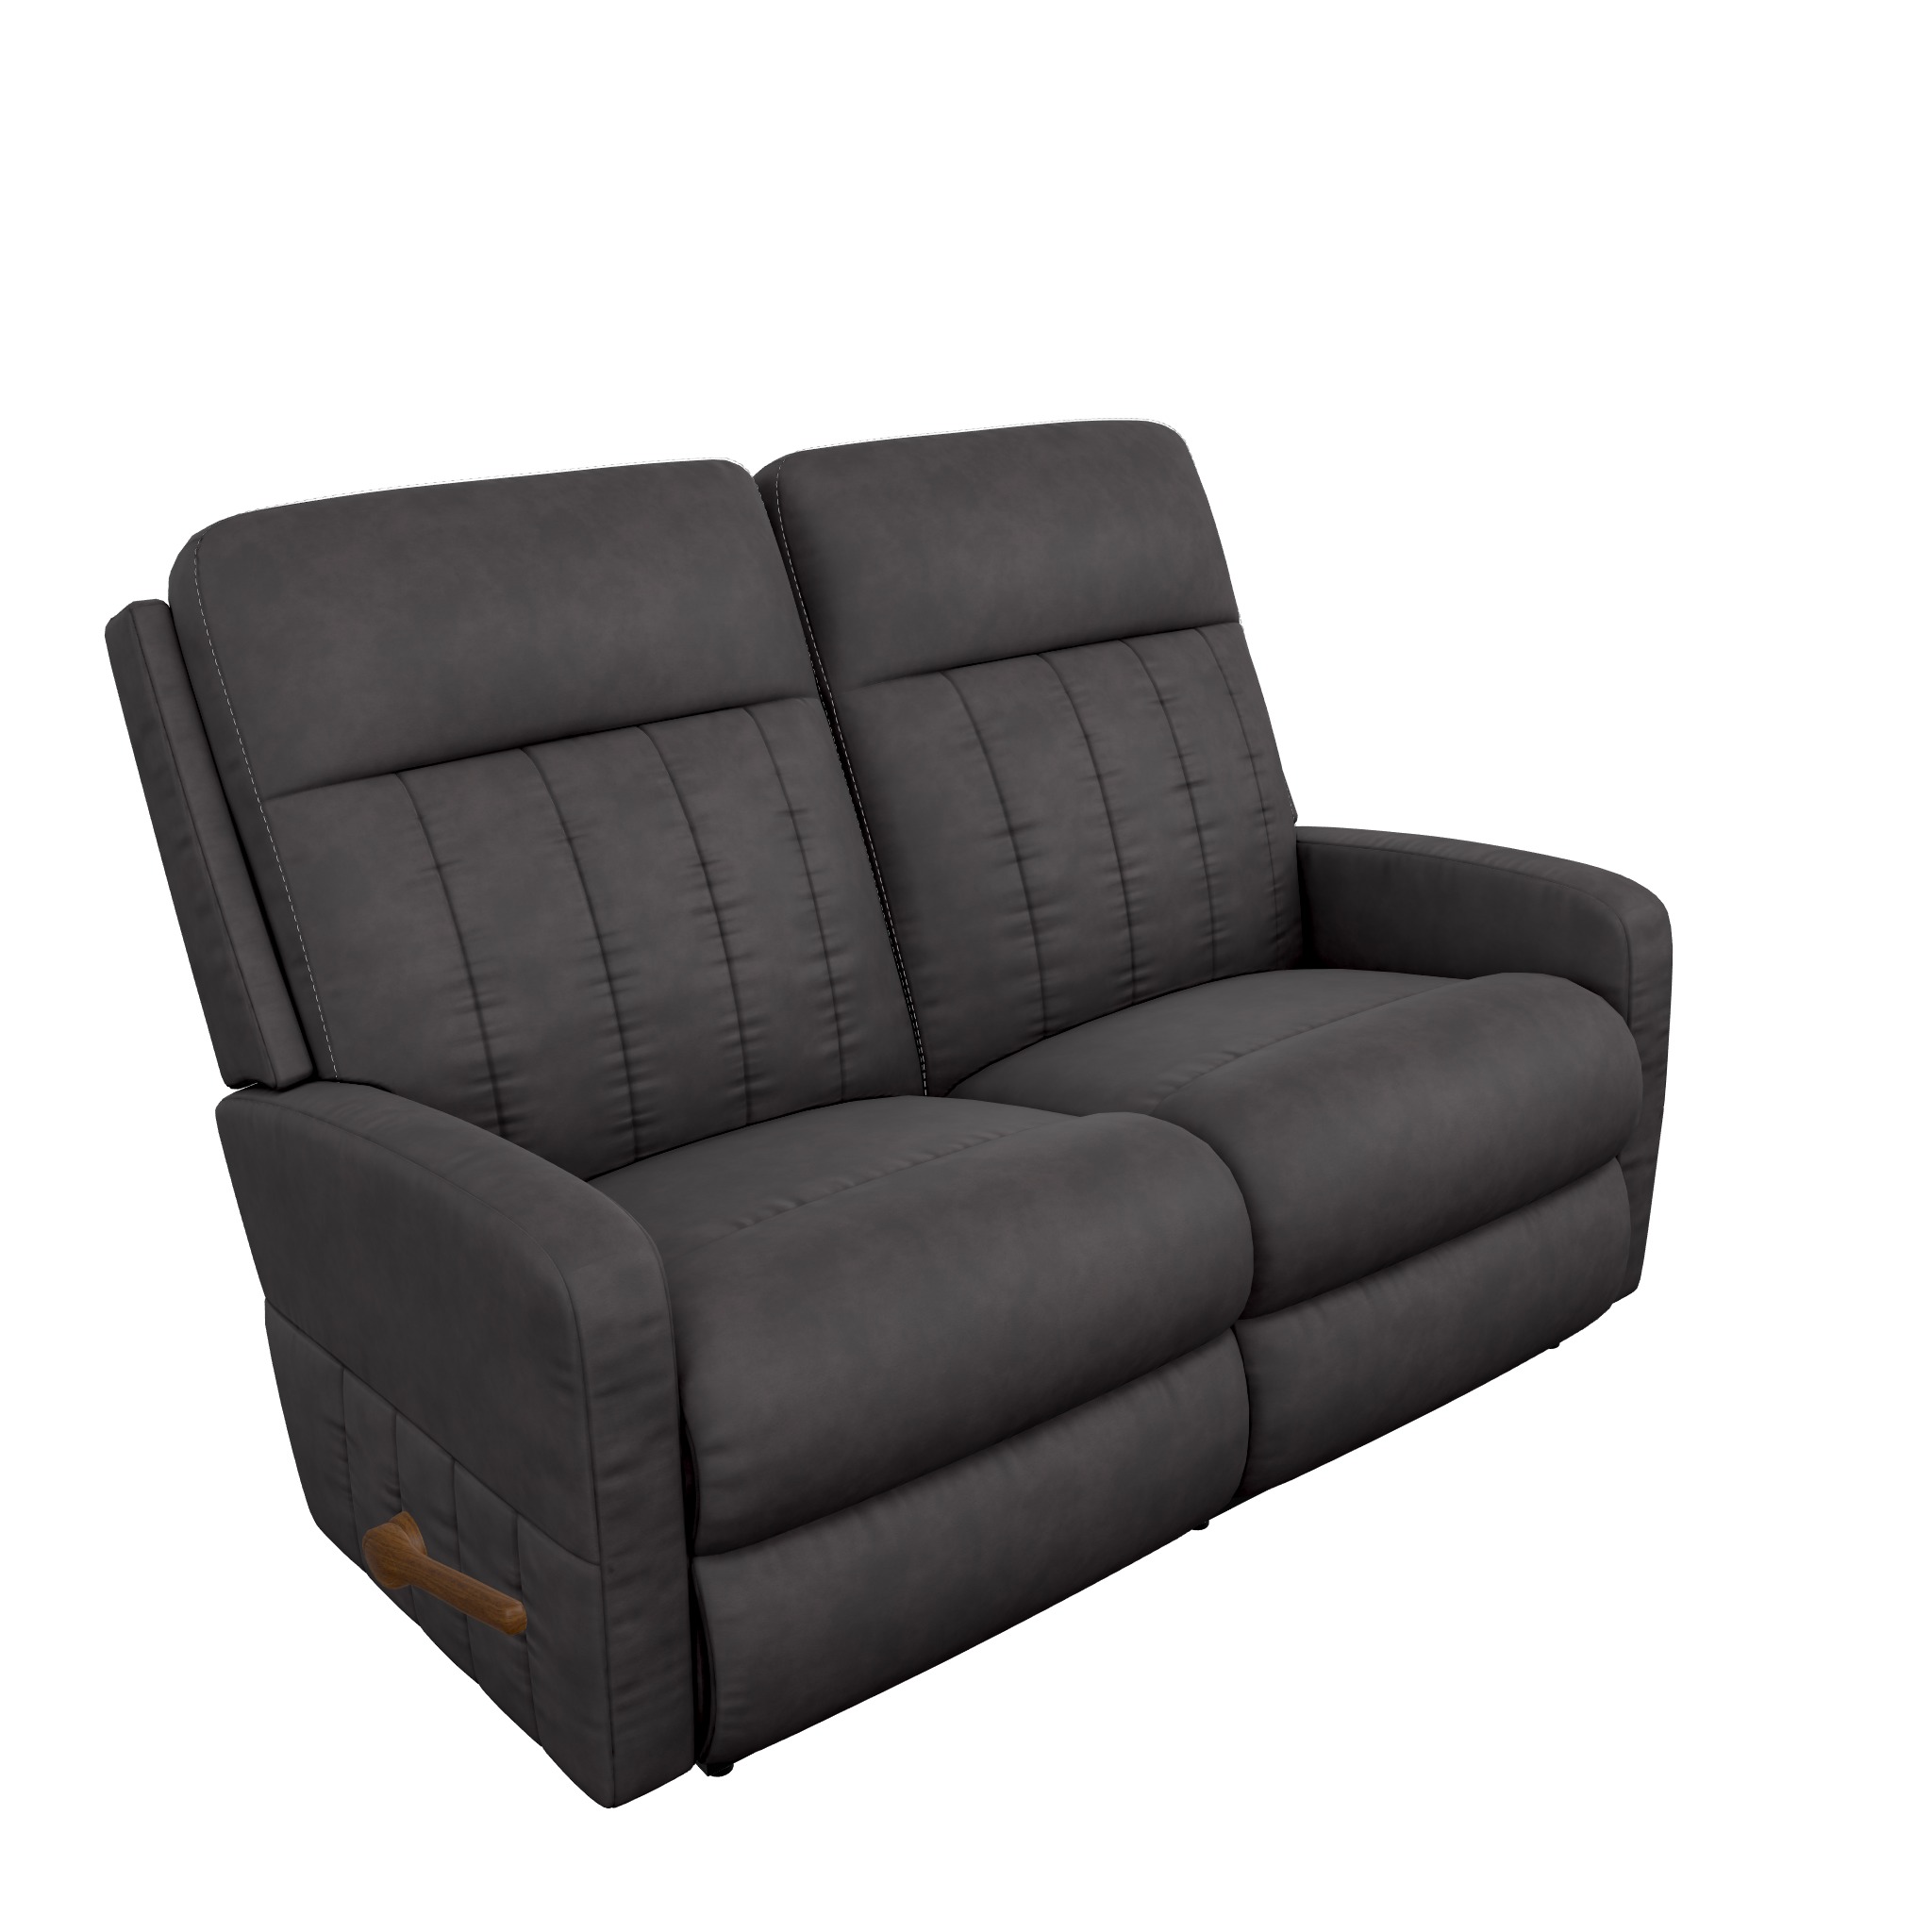 Image - 1 - Finley Leather Full Reclining Loveseat